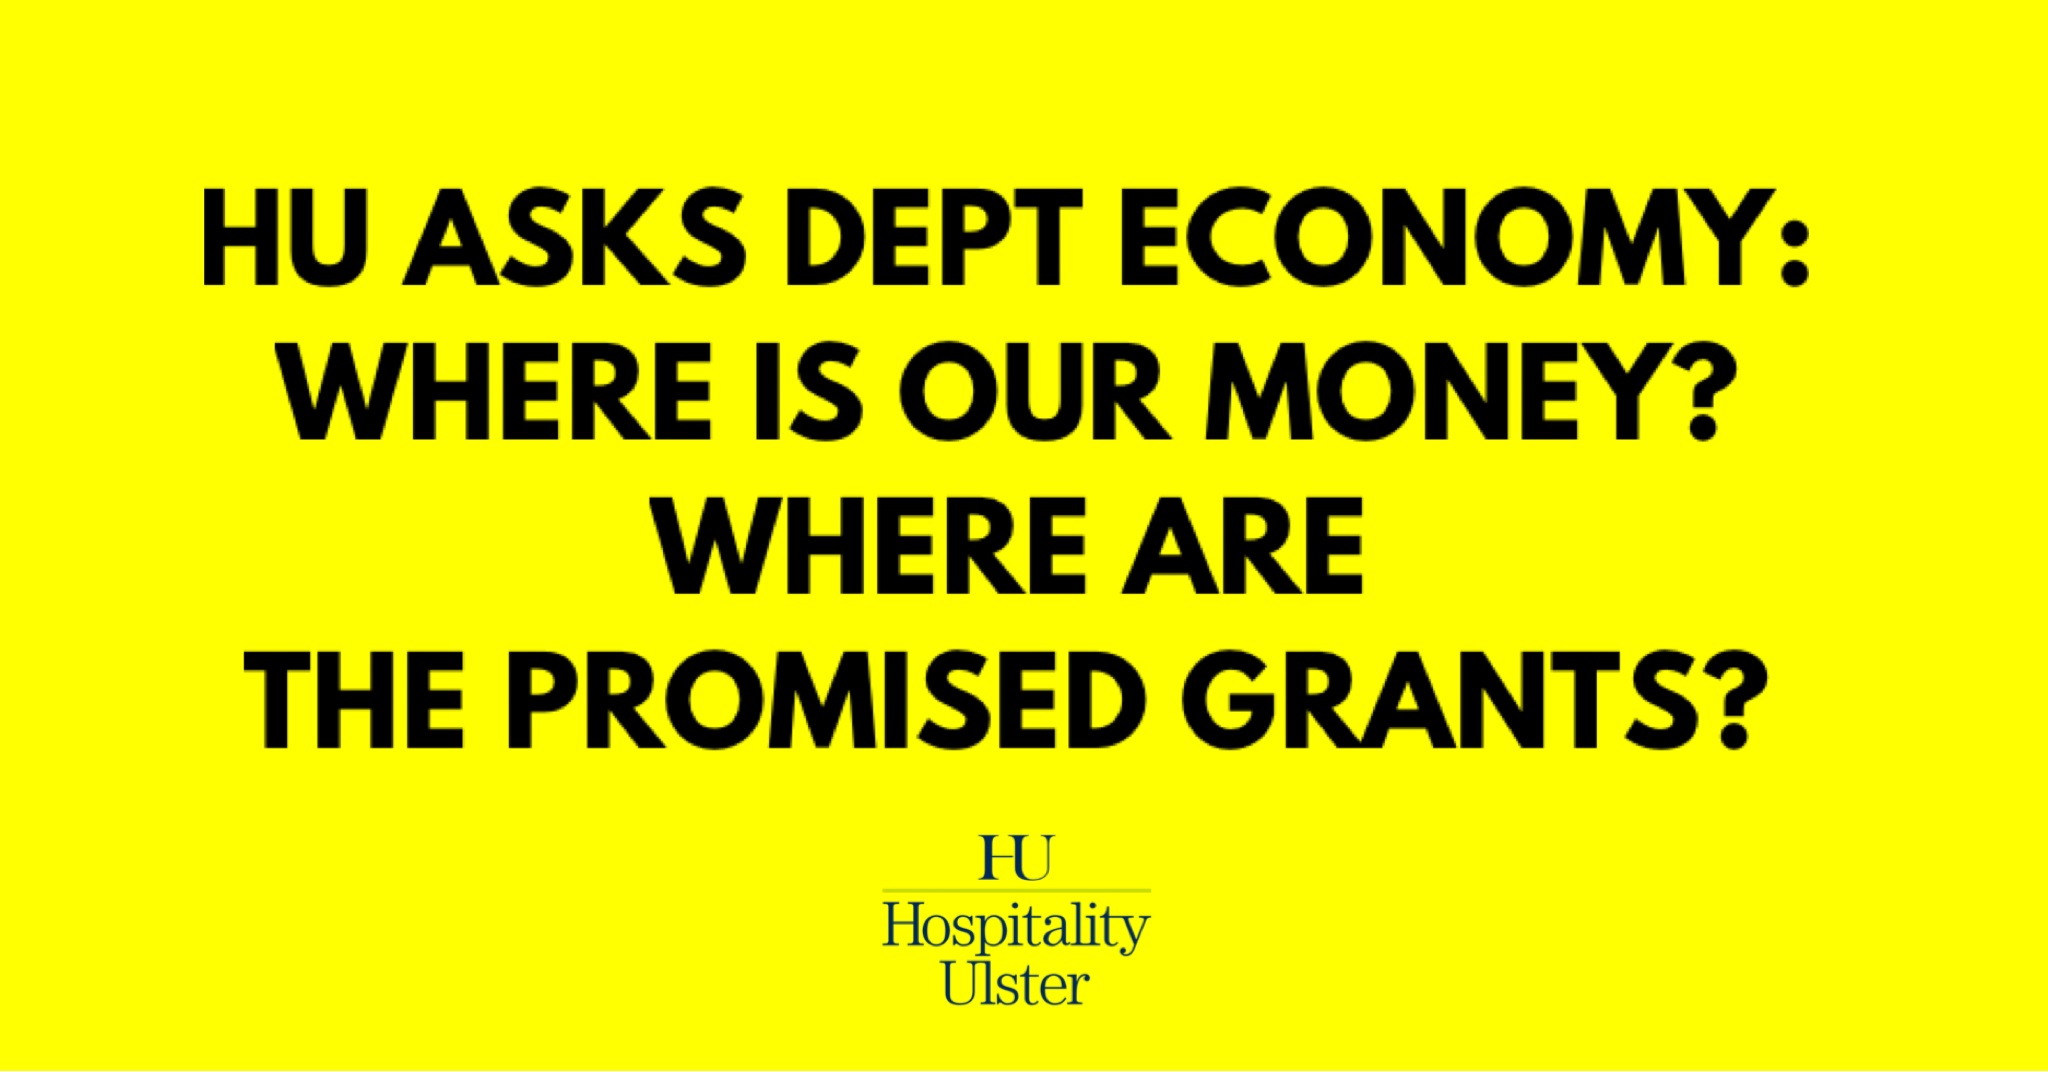 HU ASKS DEPT ECONOMY - WHERE IS OUR MONEY - WHERE ARE THE PROMISED GRANTS